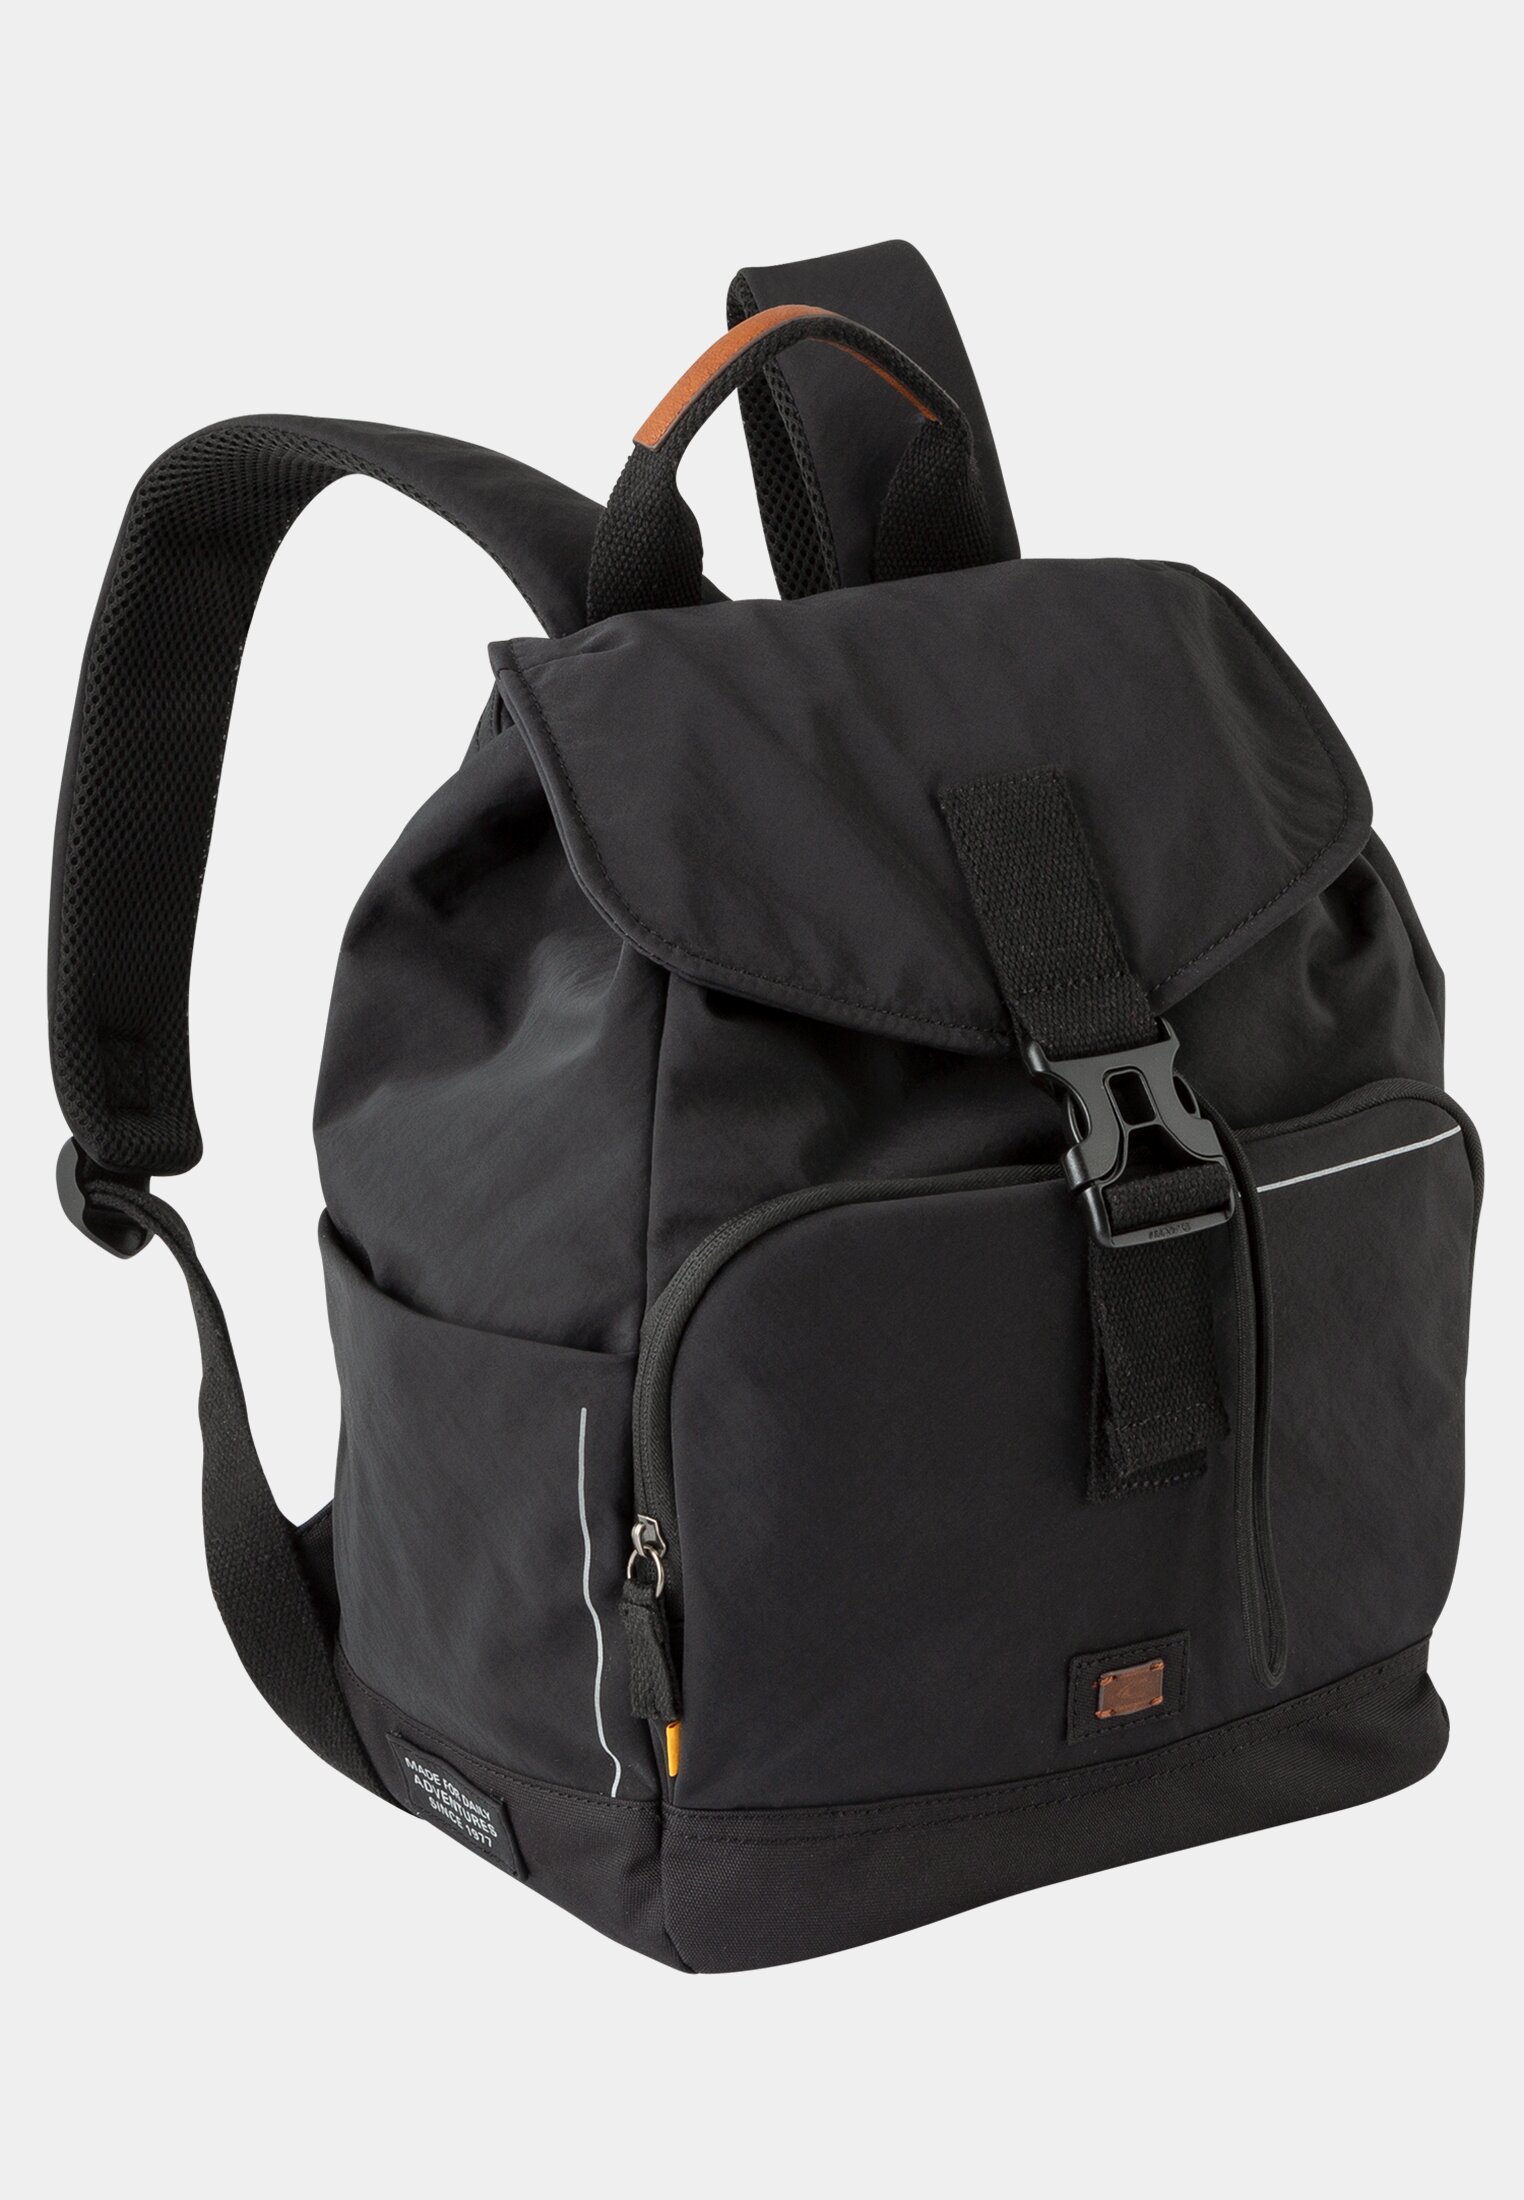 Camel Active Backpack City with reflective detail stripes